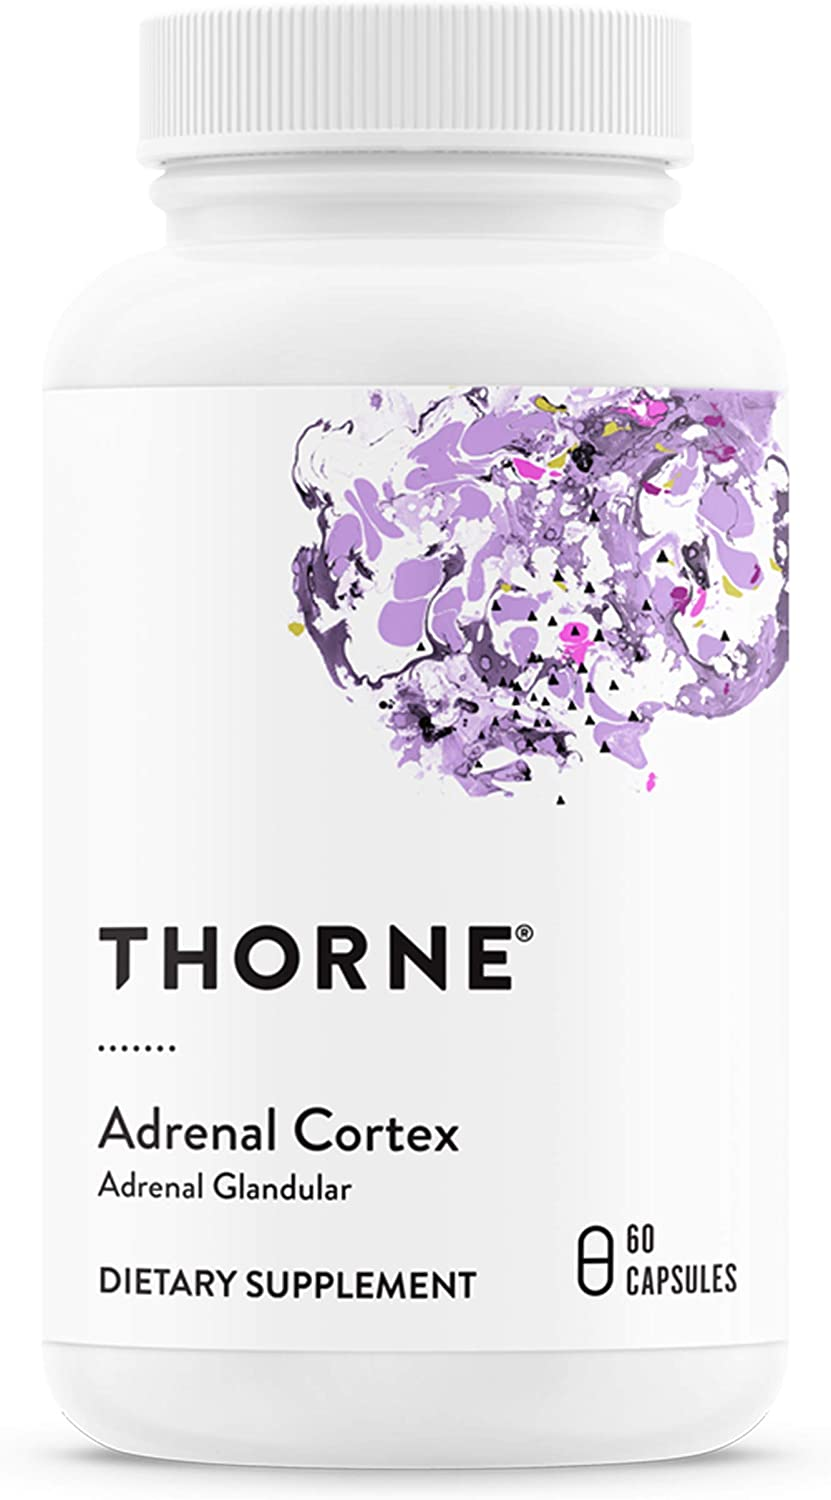 - Adrenal Cortex - Adrenal Support Supplements for Cortisol Management Support - Help Support Healthy Adrenal Function for Women & Men - 60 Capsules